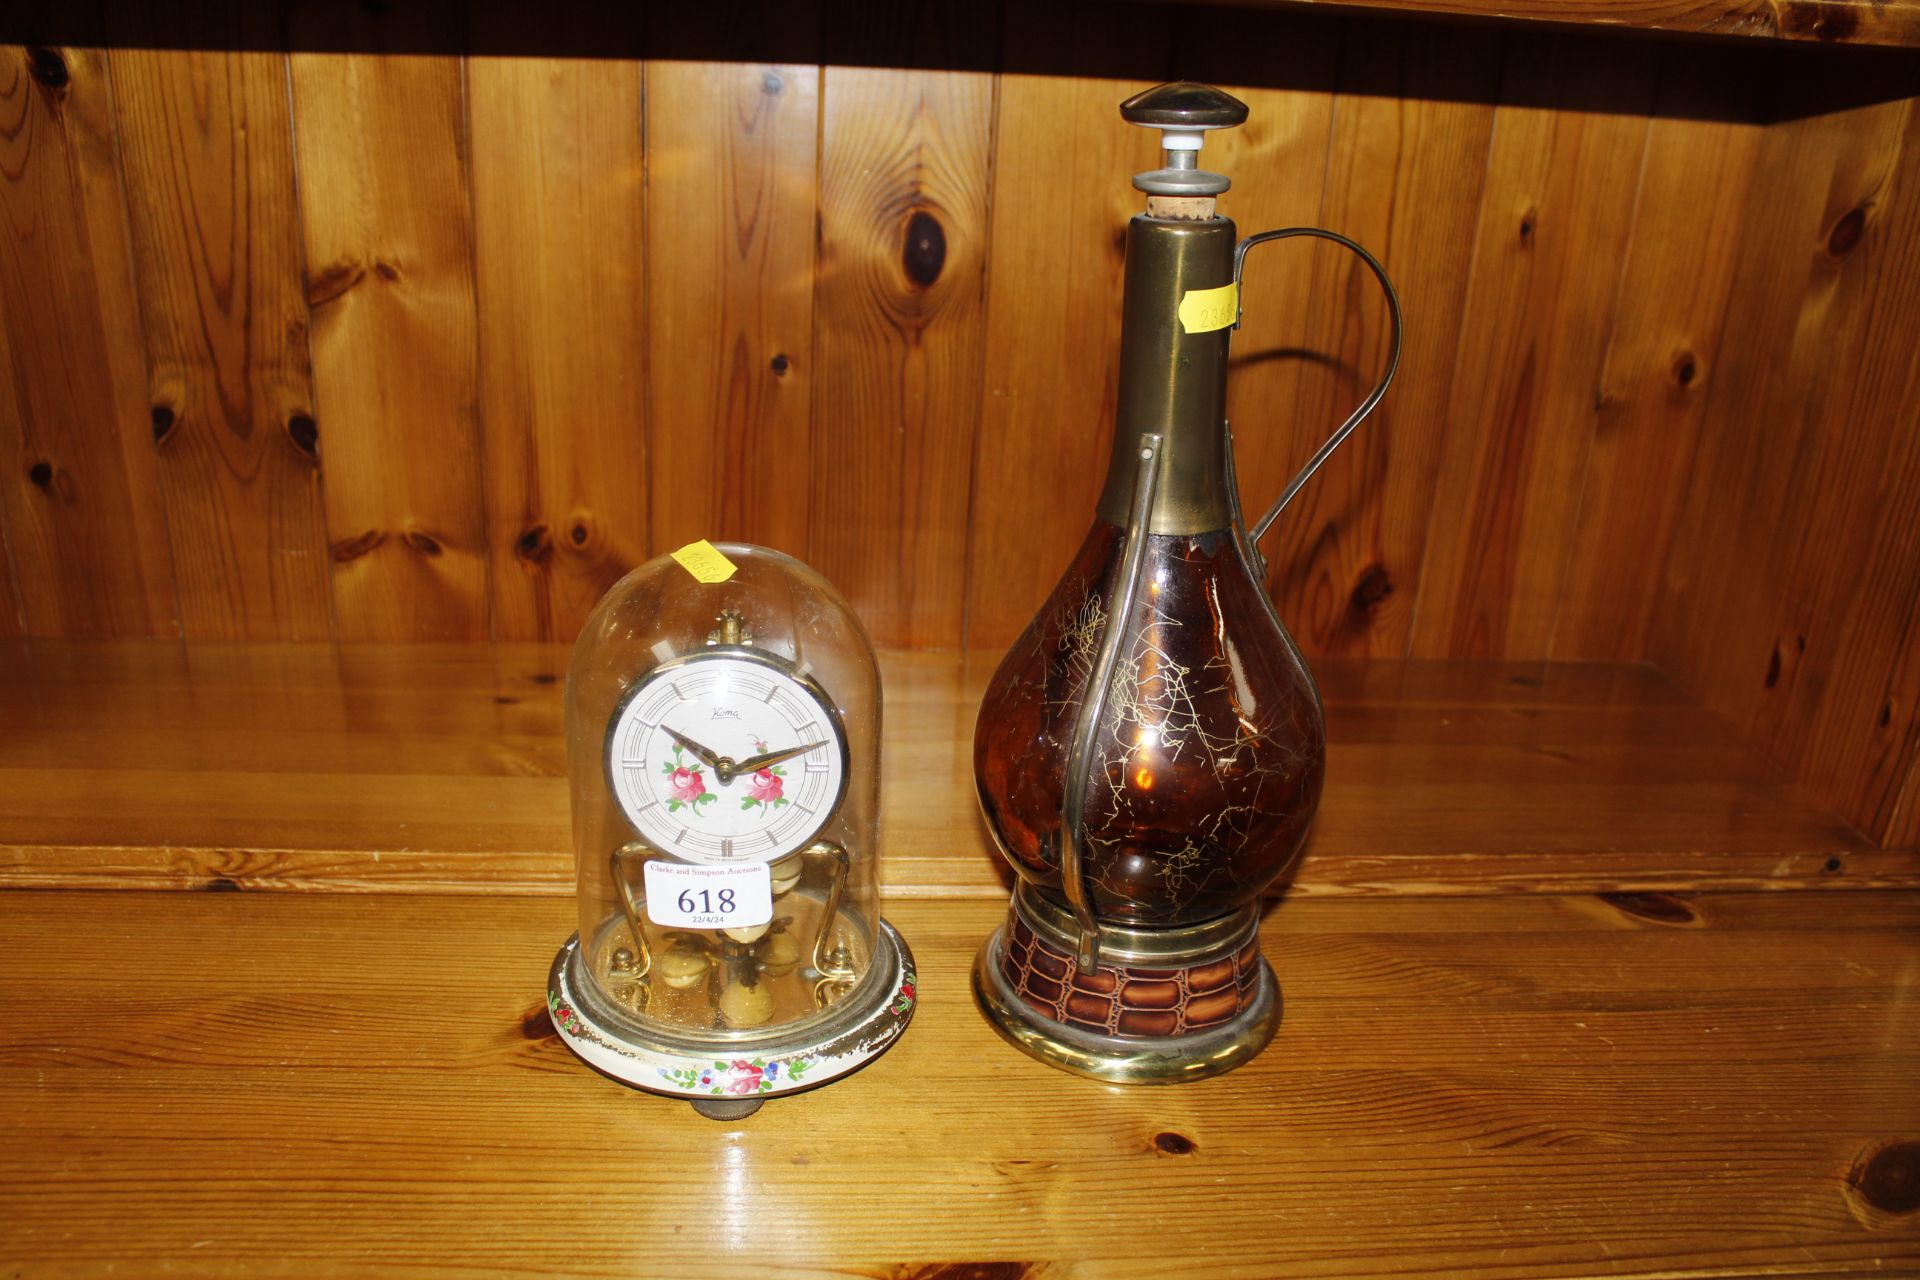 A musical decanter and an anniversary clock